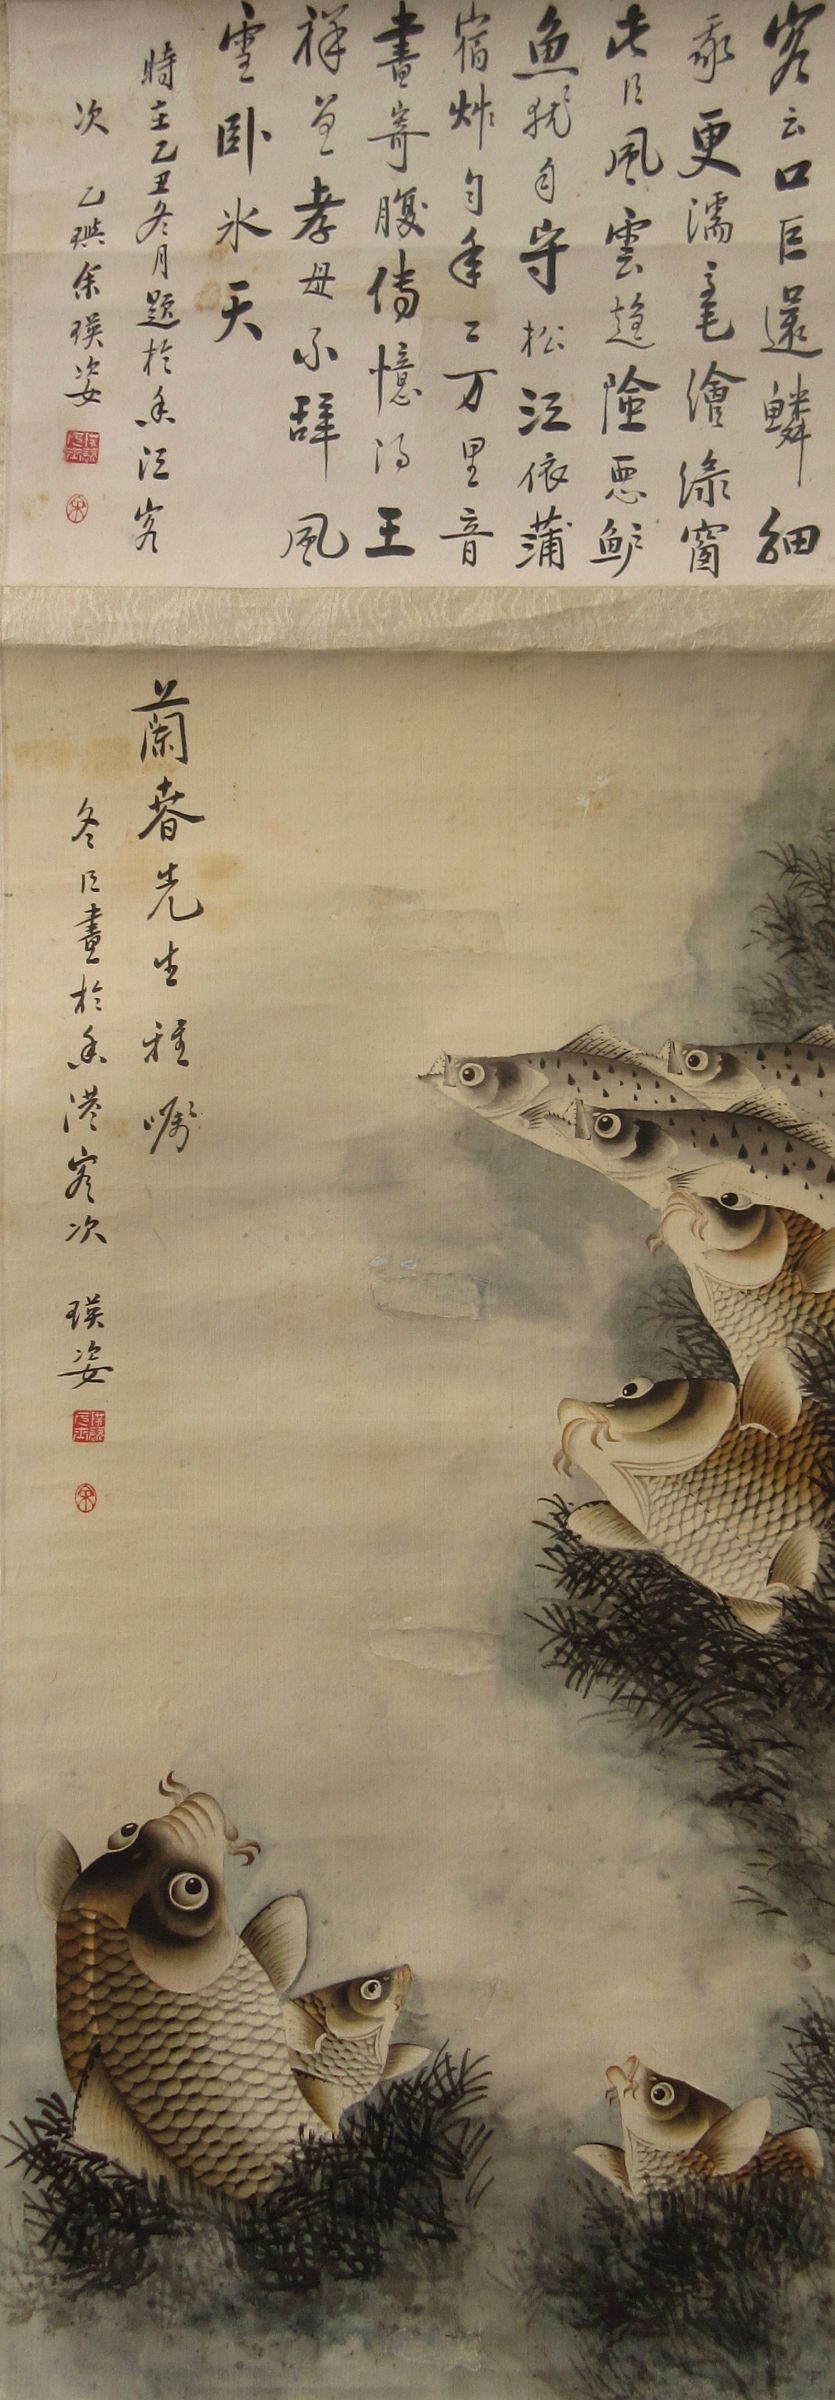 Antique Chinese Scroll Painting of Fish and Calligraphy